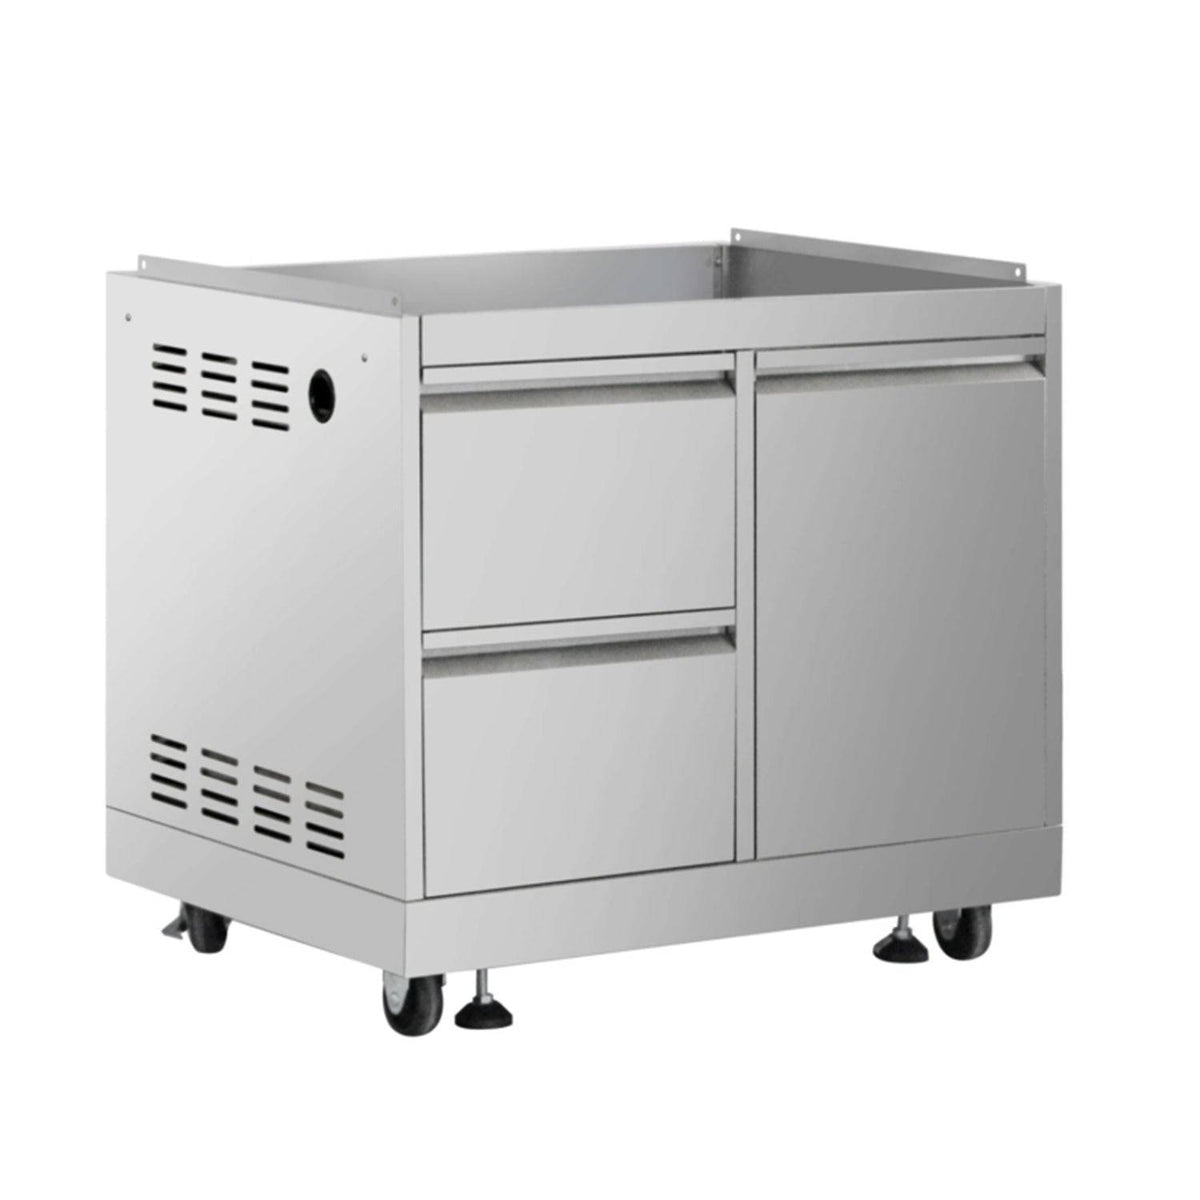 Fobest Outdoor Kitchen BBQ Grill Cabinet in Stainless Steel